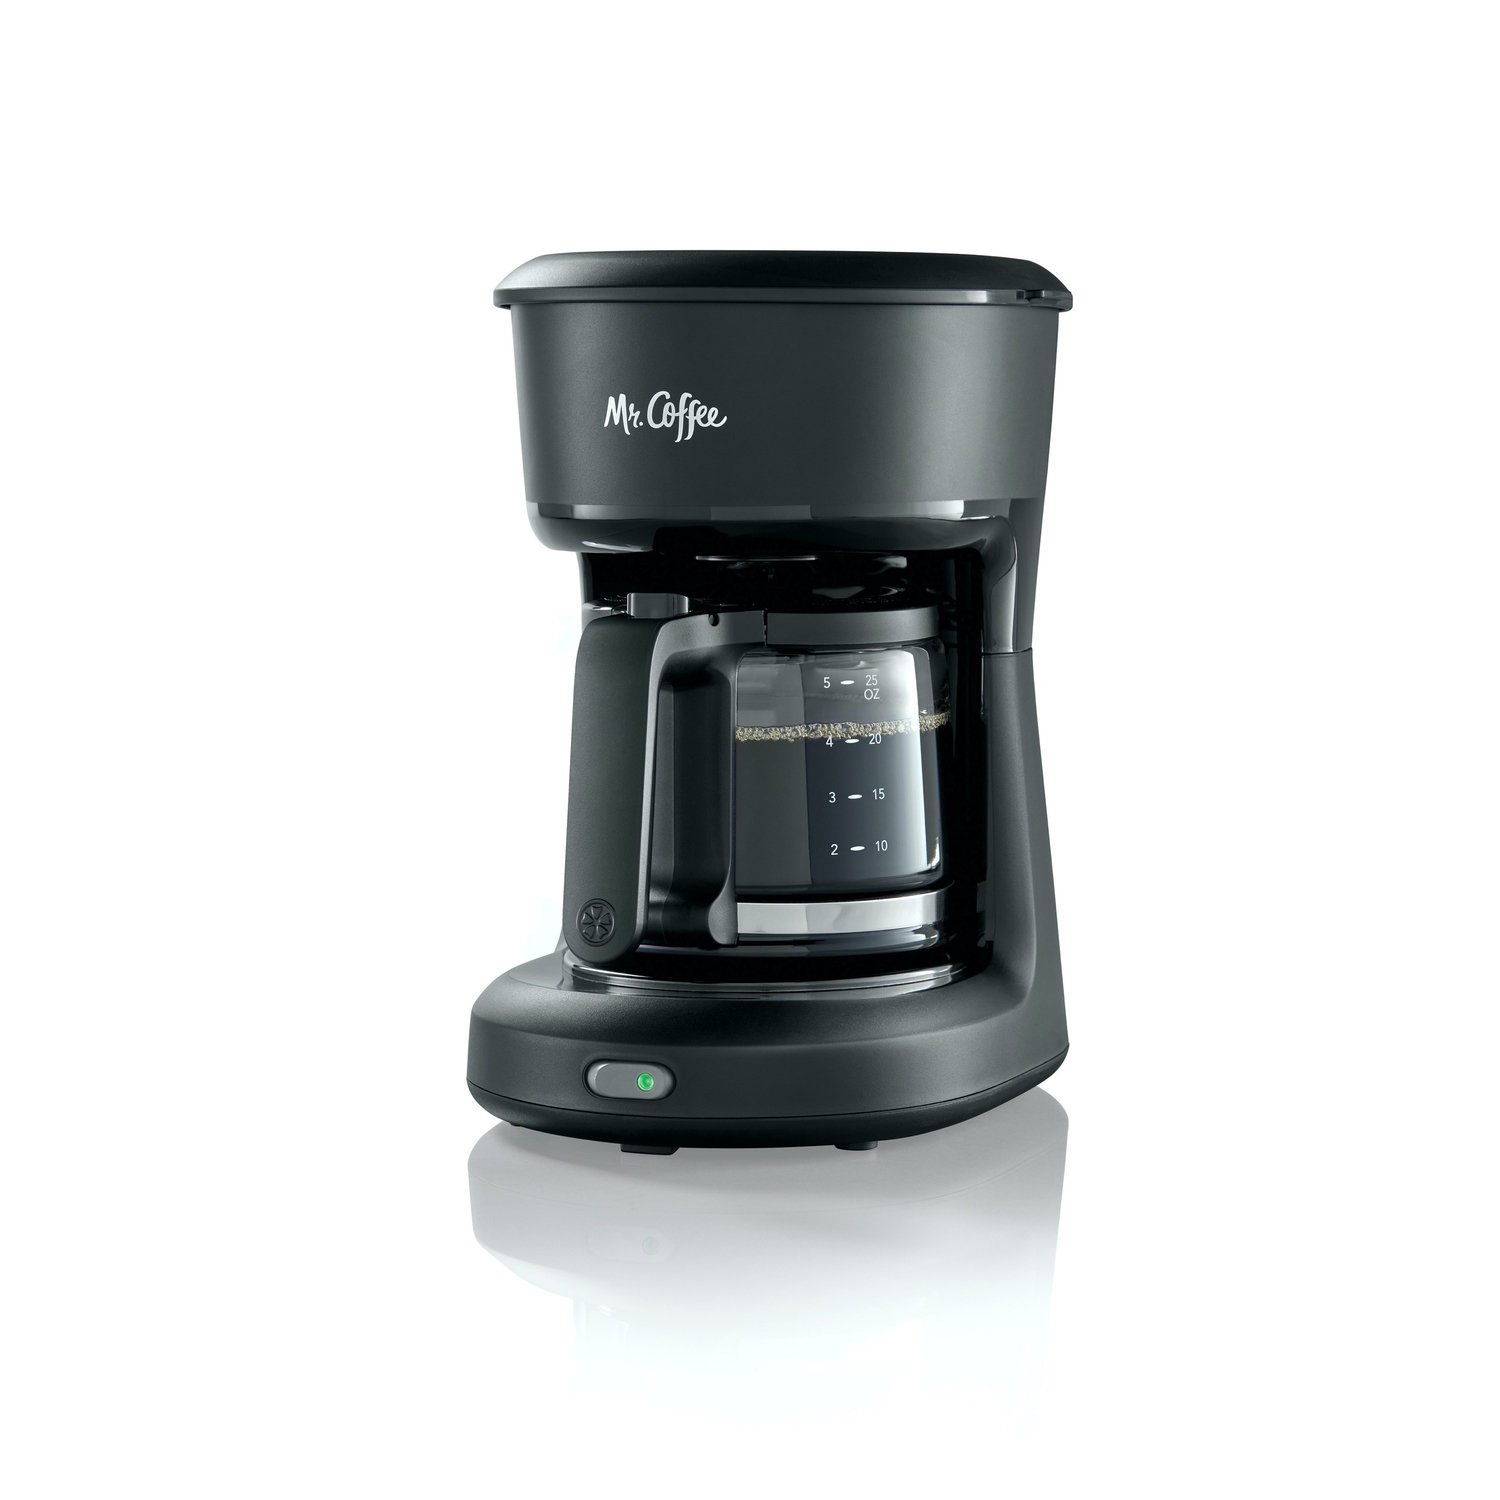 Mr. Coffee Coffee Maker with Auto Pause and Glass Carafe, 12 Cups